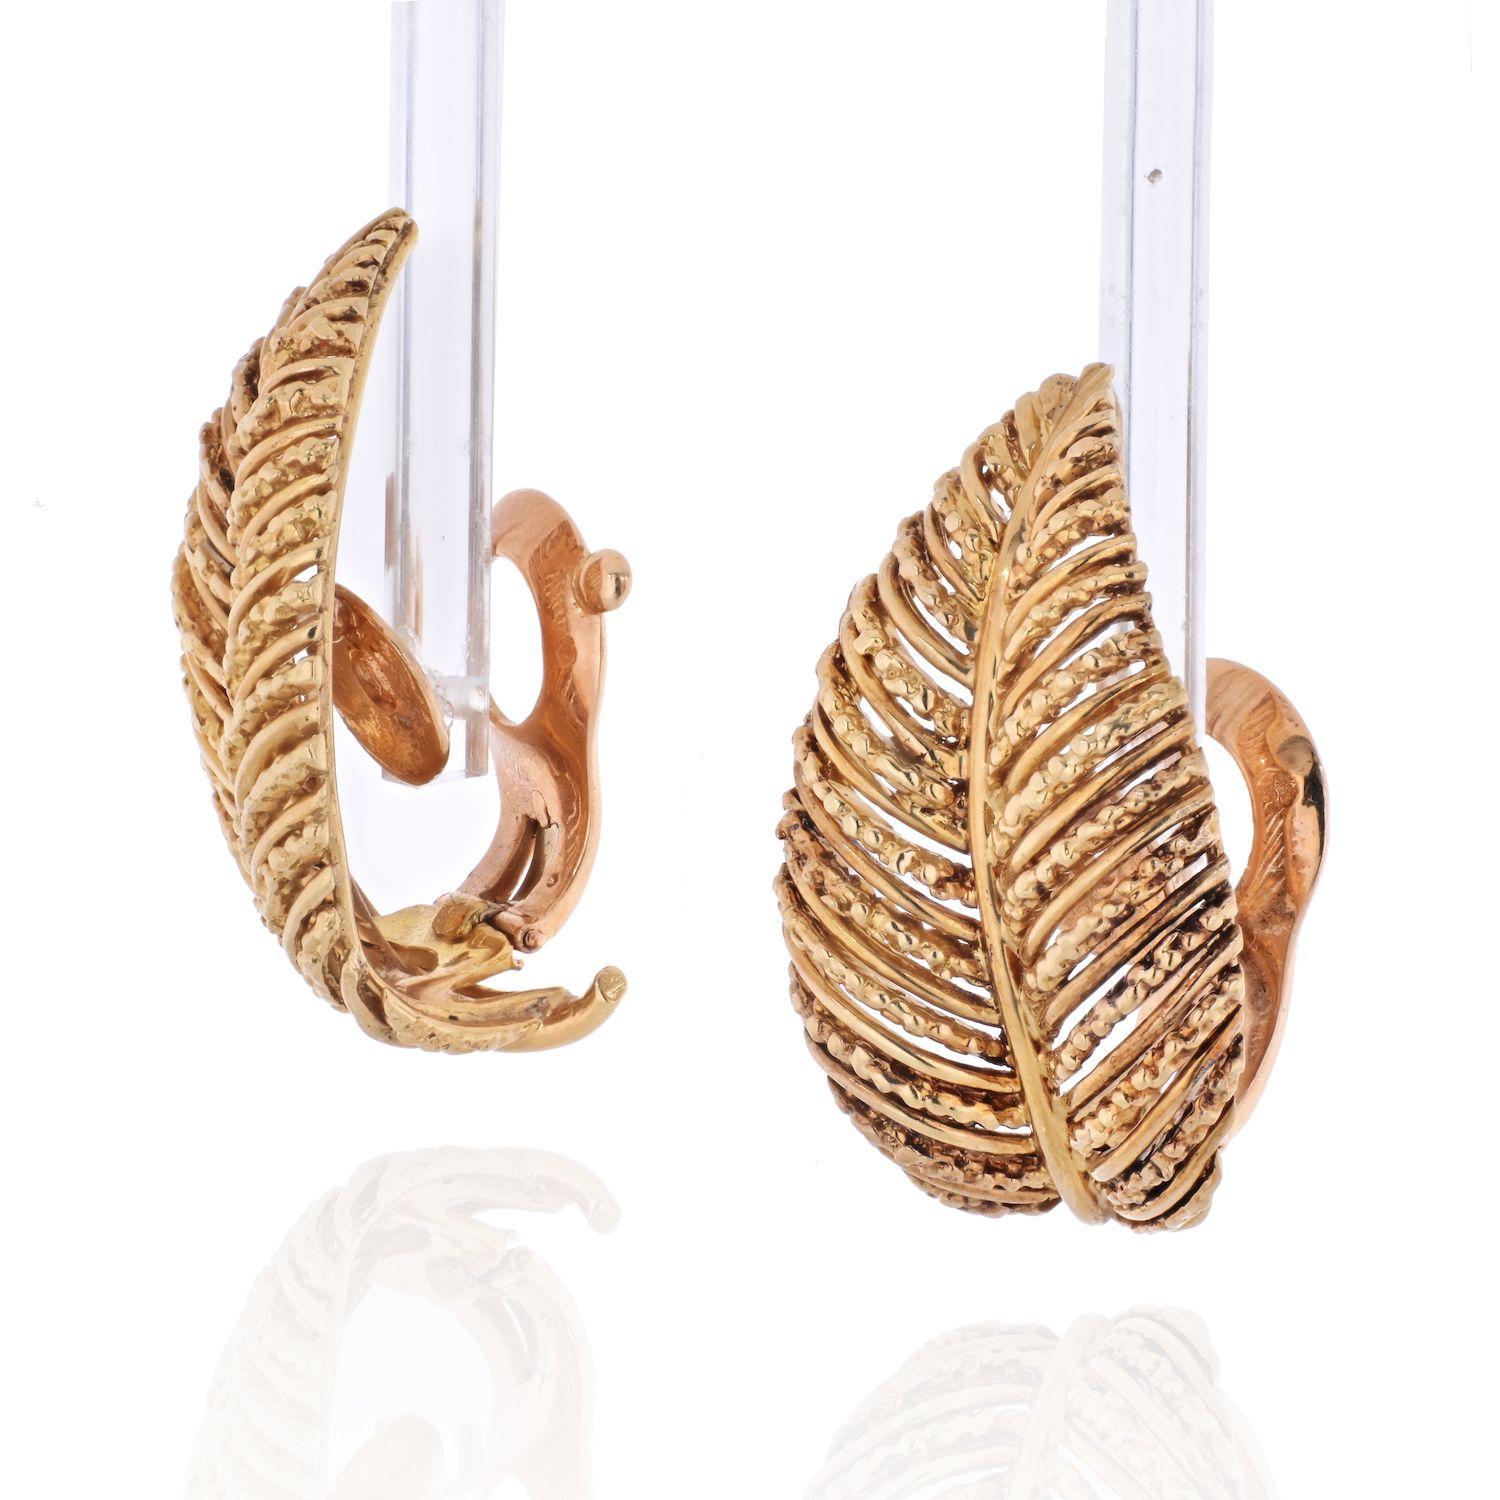 A beautiful pair of VCA diamond and 18K gold earrings with a lovely leaf motif.
Organic patter of leaves with a secure clip on backing. 
Earrings measure 33mm and have a very romantic vintage flare. 